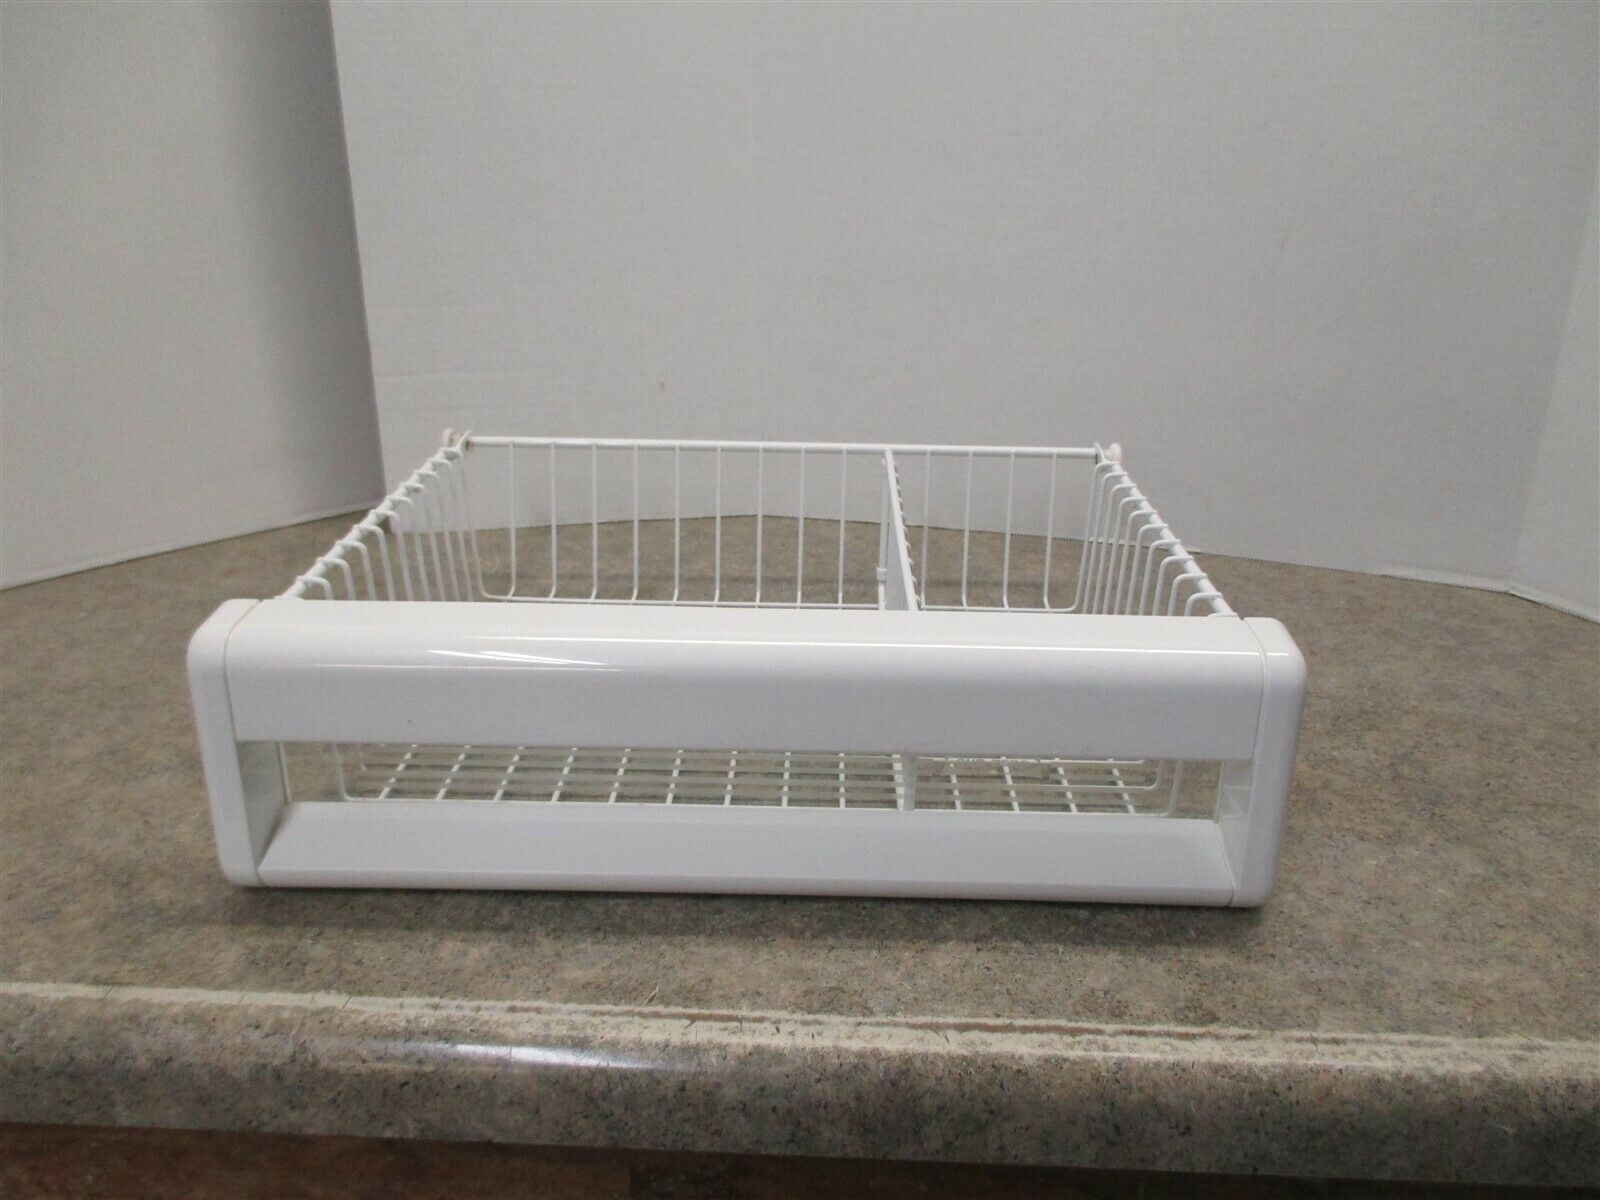 SUBZERO FRIG. ROLL-OUT BASKET (SCRATCHES) 16 1/2" X 13 7/8" PART 3500300 3411160 - $65.00